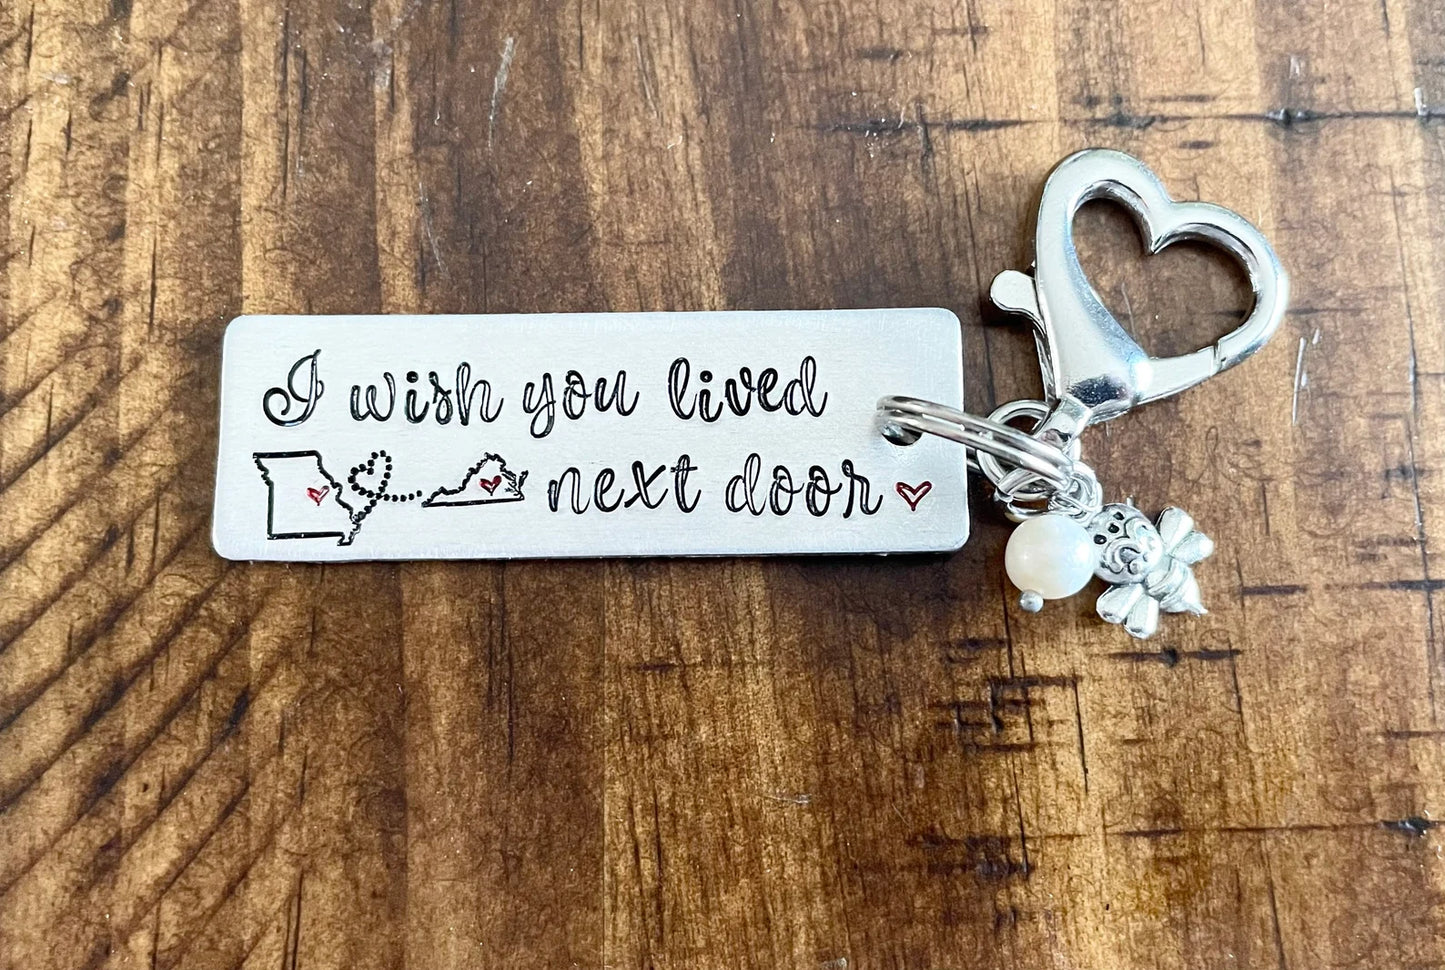 Miss you gift I wish you lived next door key chain Bestie gift long distance friends gift Friends forever long distance relationship